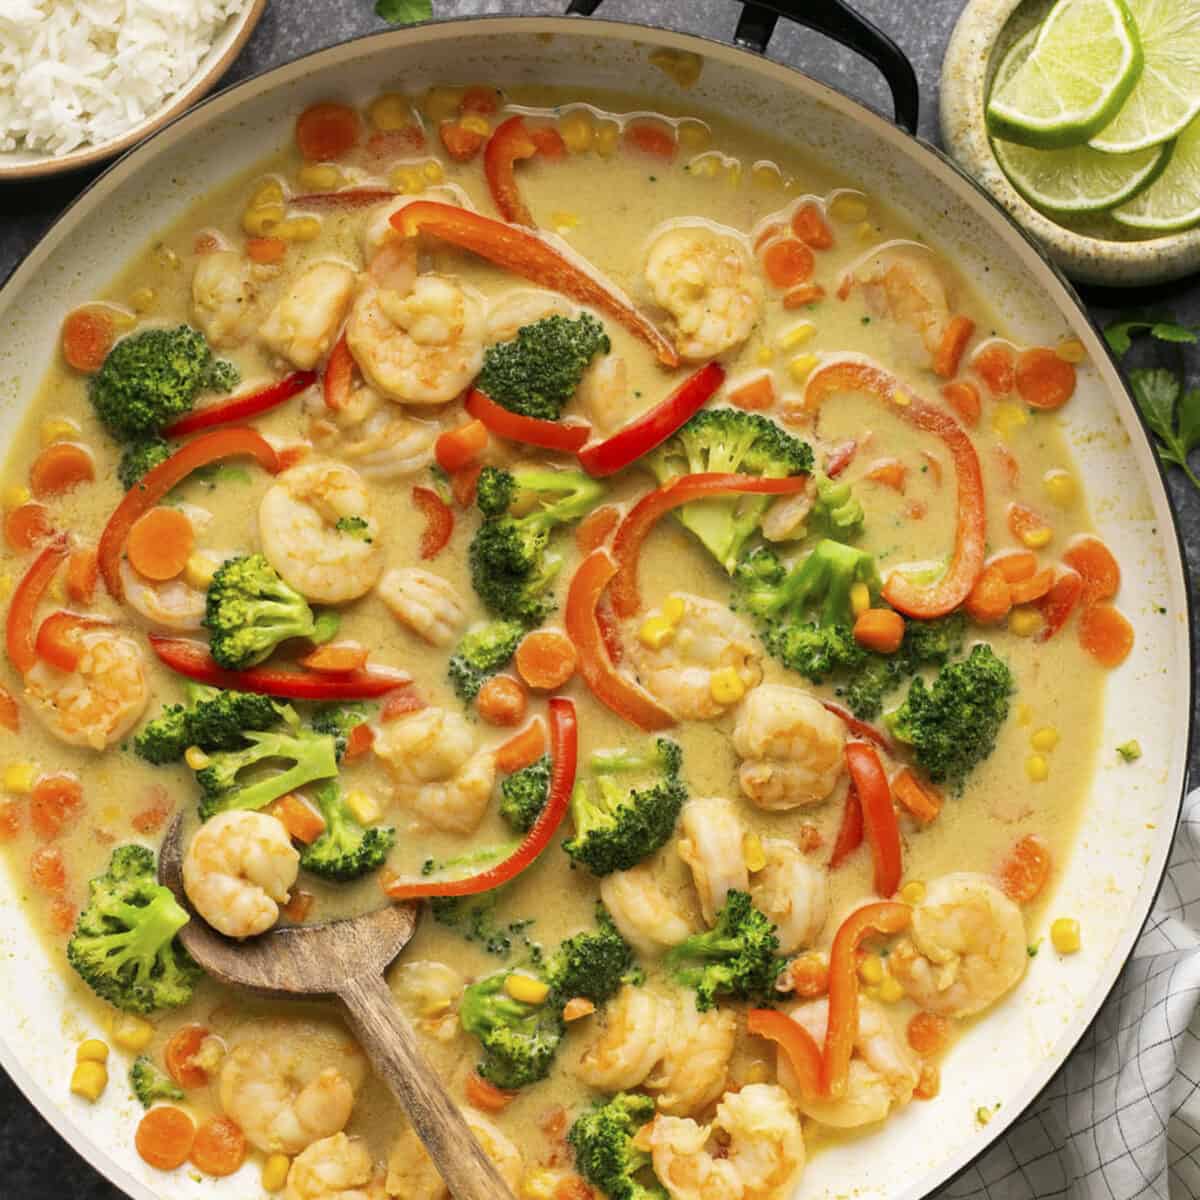 Shrimp and vegetables cooked in a creamy sauce.